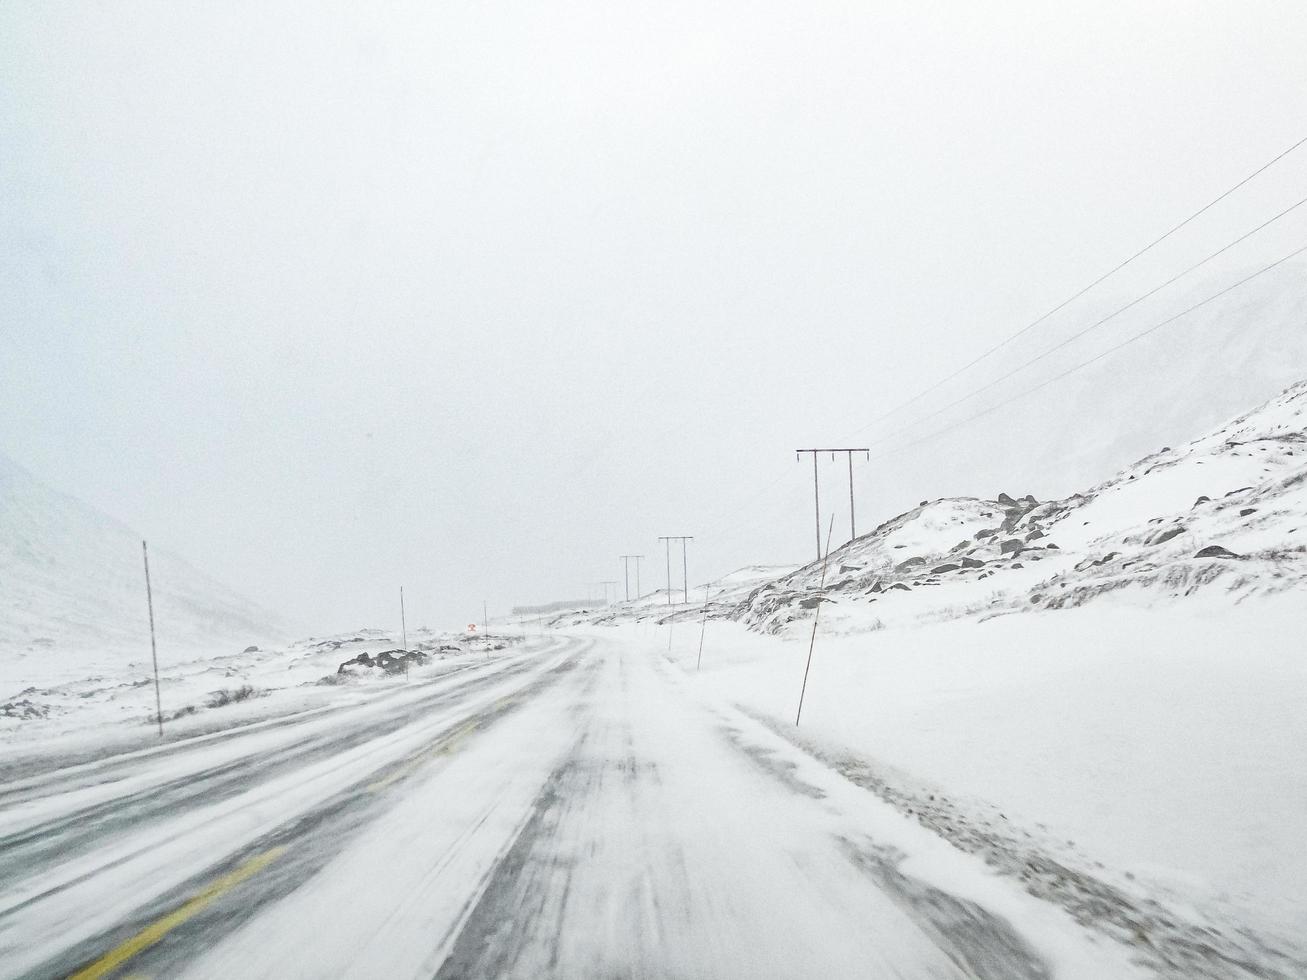 Driving through blizzard snowstorm with black ice on road, Norway. photo